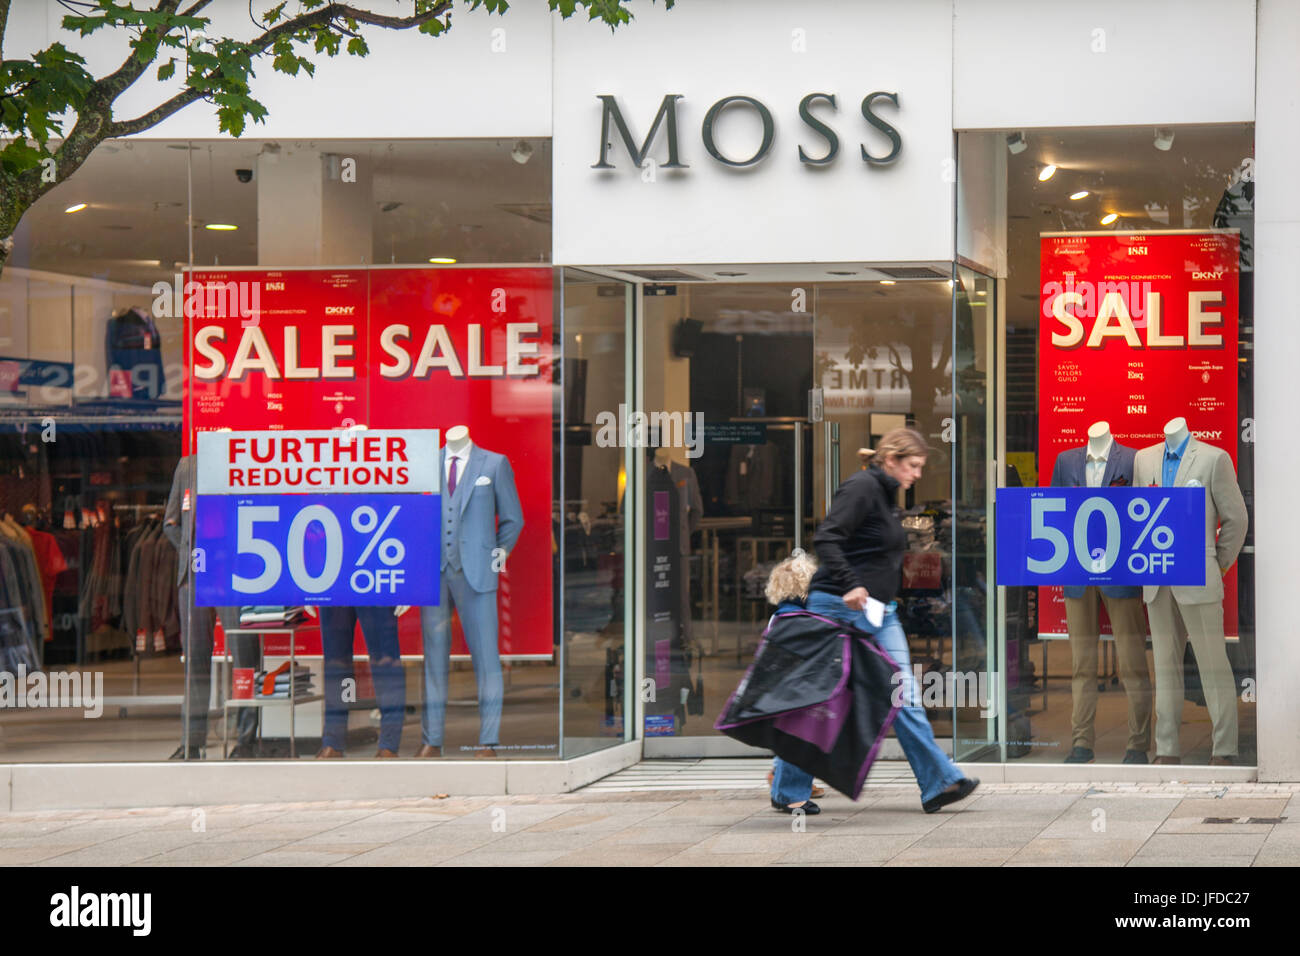 Moss Bros. Designer menswear Shop front %0% Summer Sales reductions  Posters, in Fishergate Preston, UK Stock Photo - Alamy